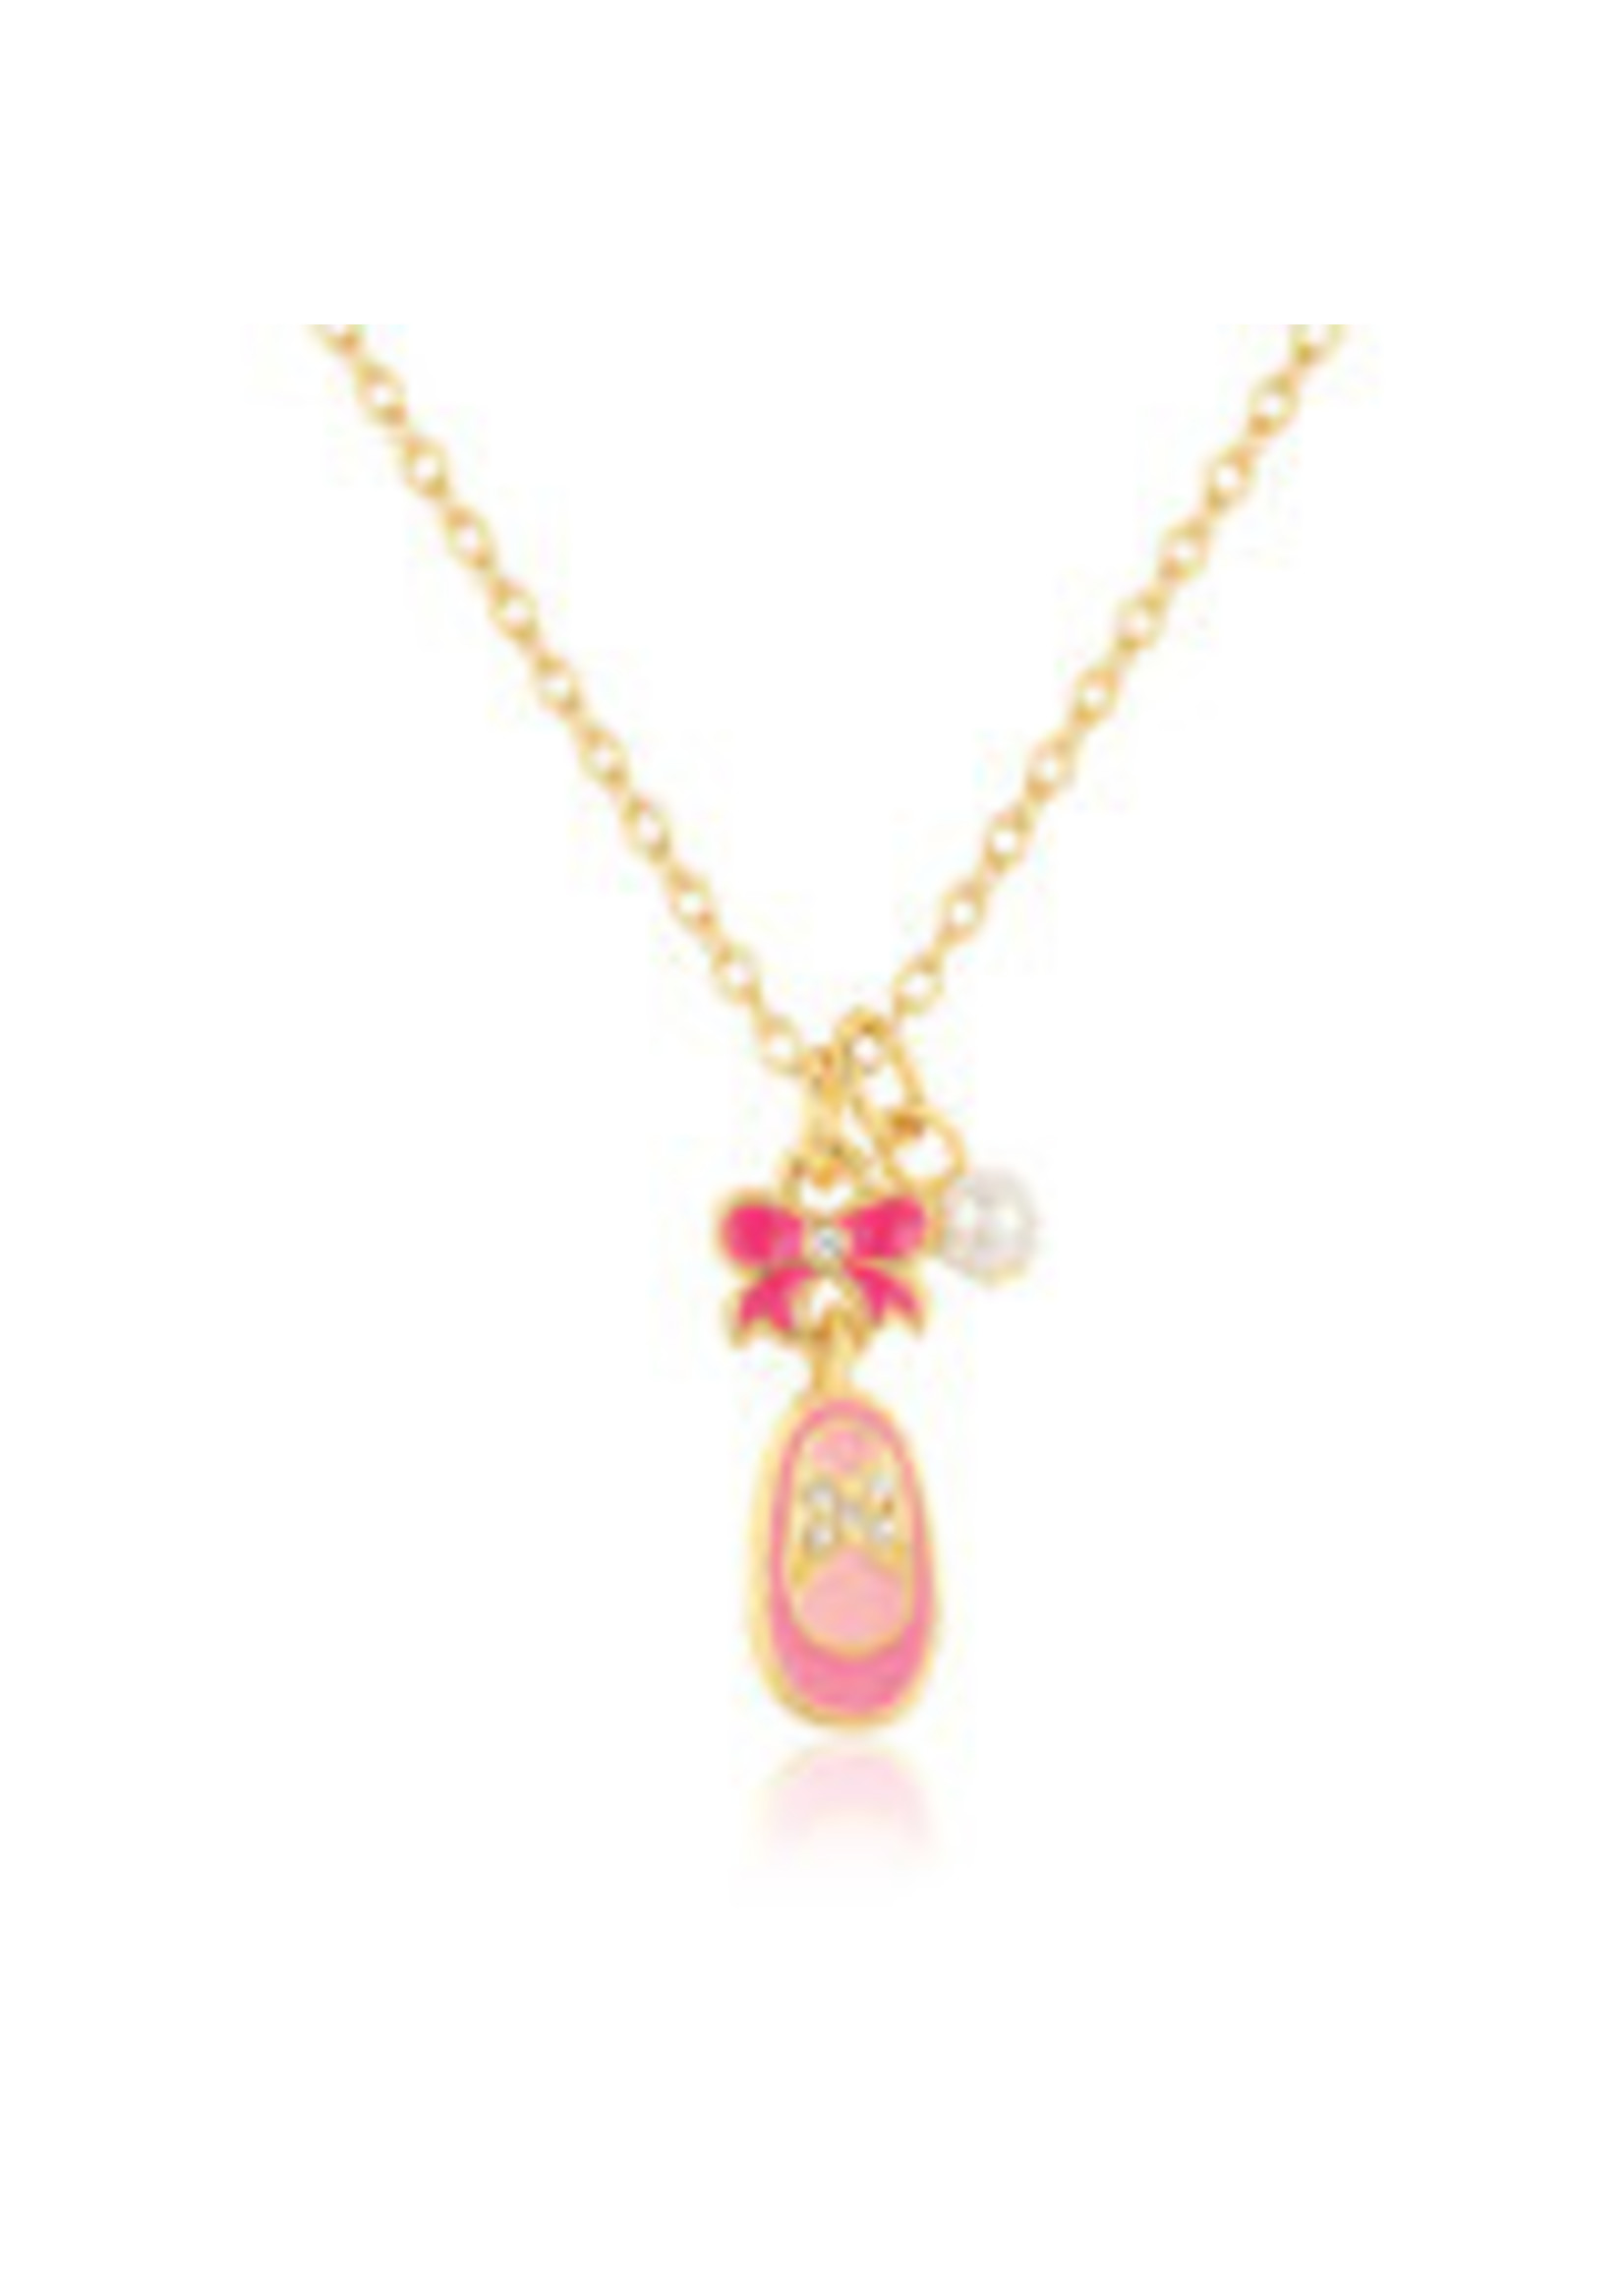 GIRL NATION J6641N DARLING SWEET PETITE BALLET SHOE NECKLACE WITH PEARL